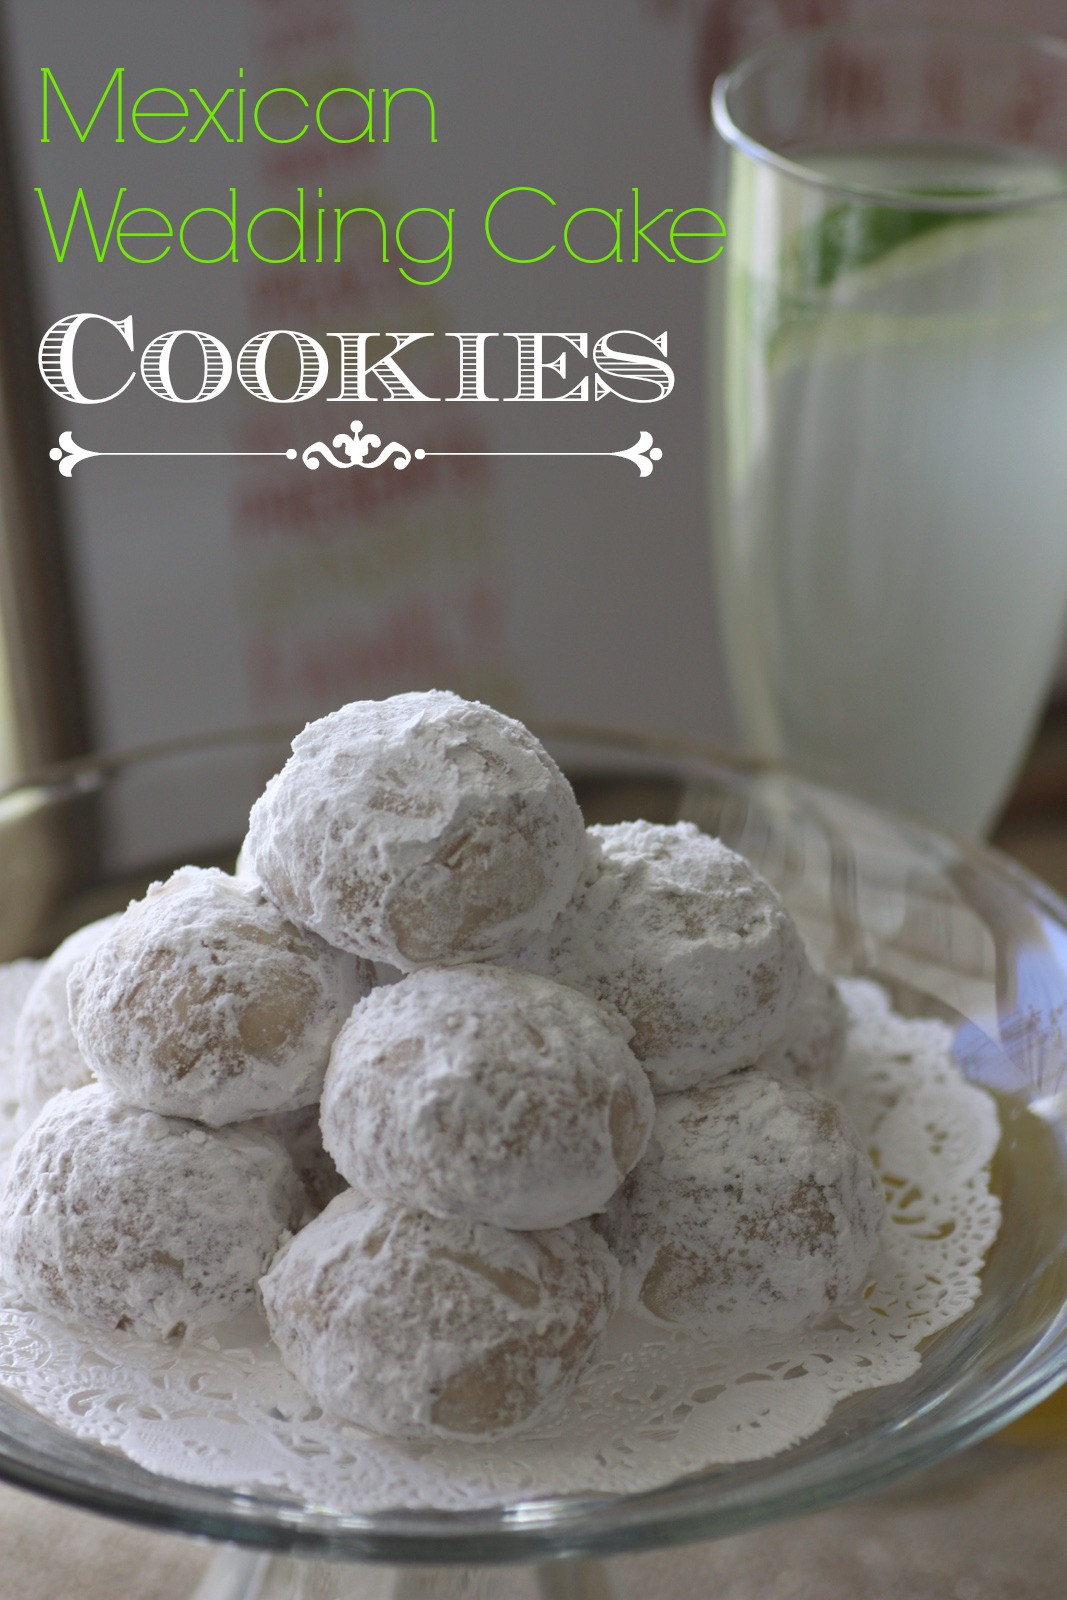 Mexican Wedding Cakes Cookies
 Mexican Wedding Cake Cookie Recipe